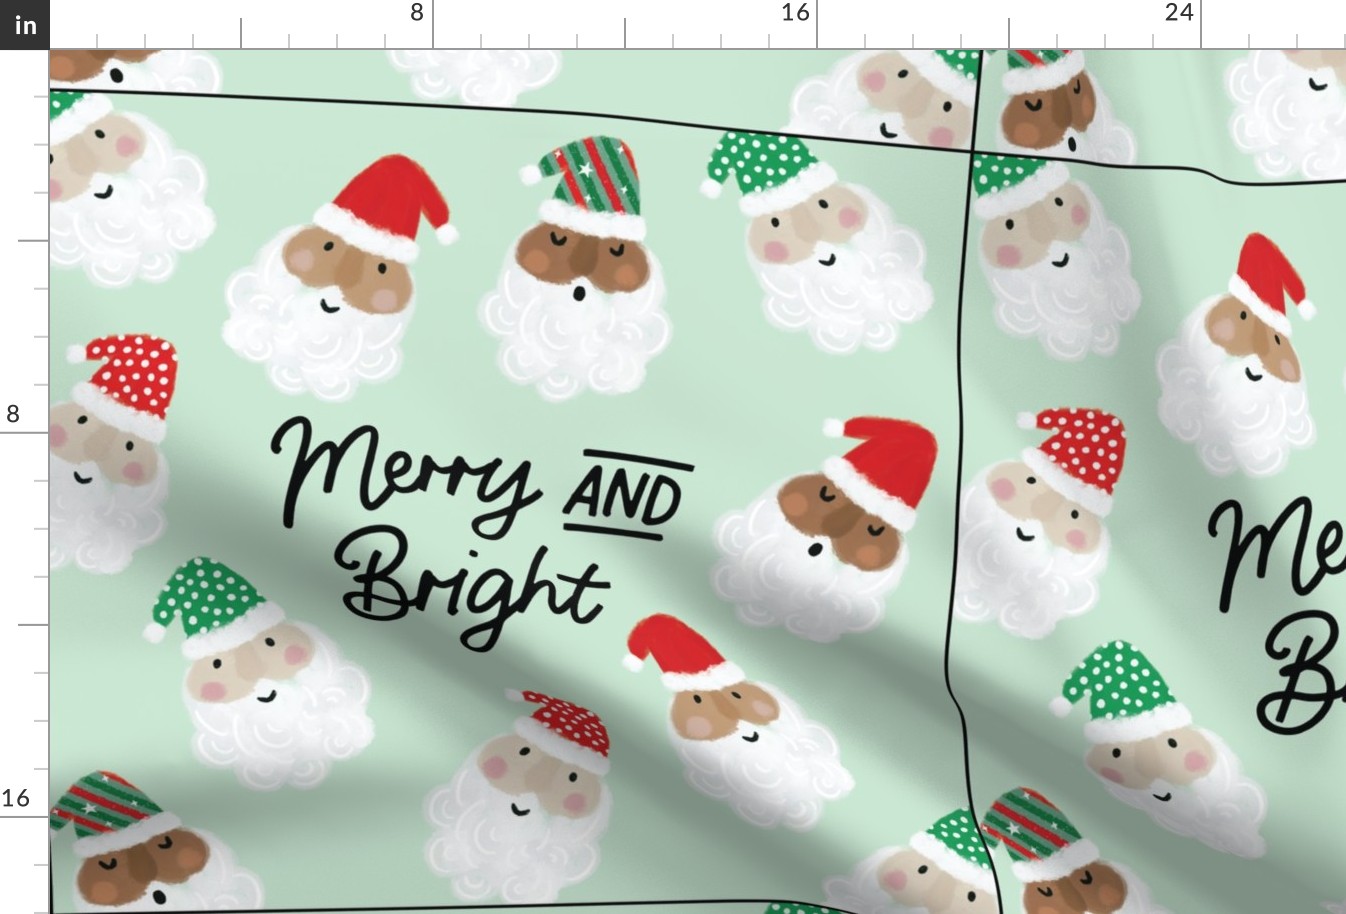 6 loveys: merry and bright on christmas mint